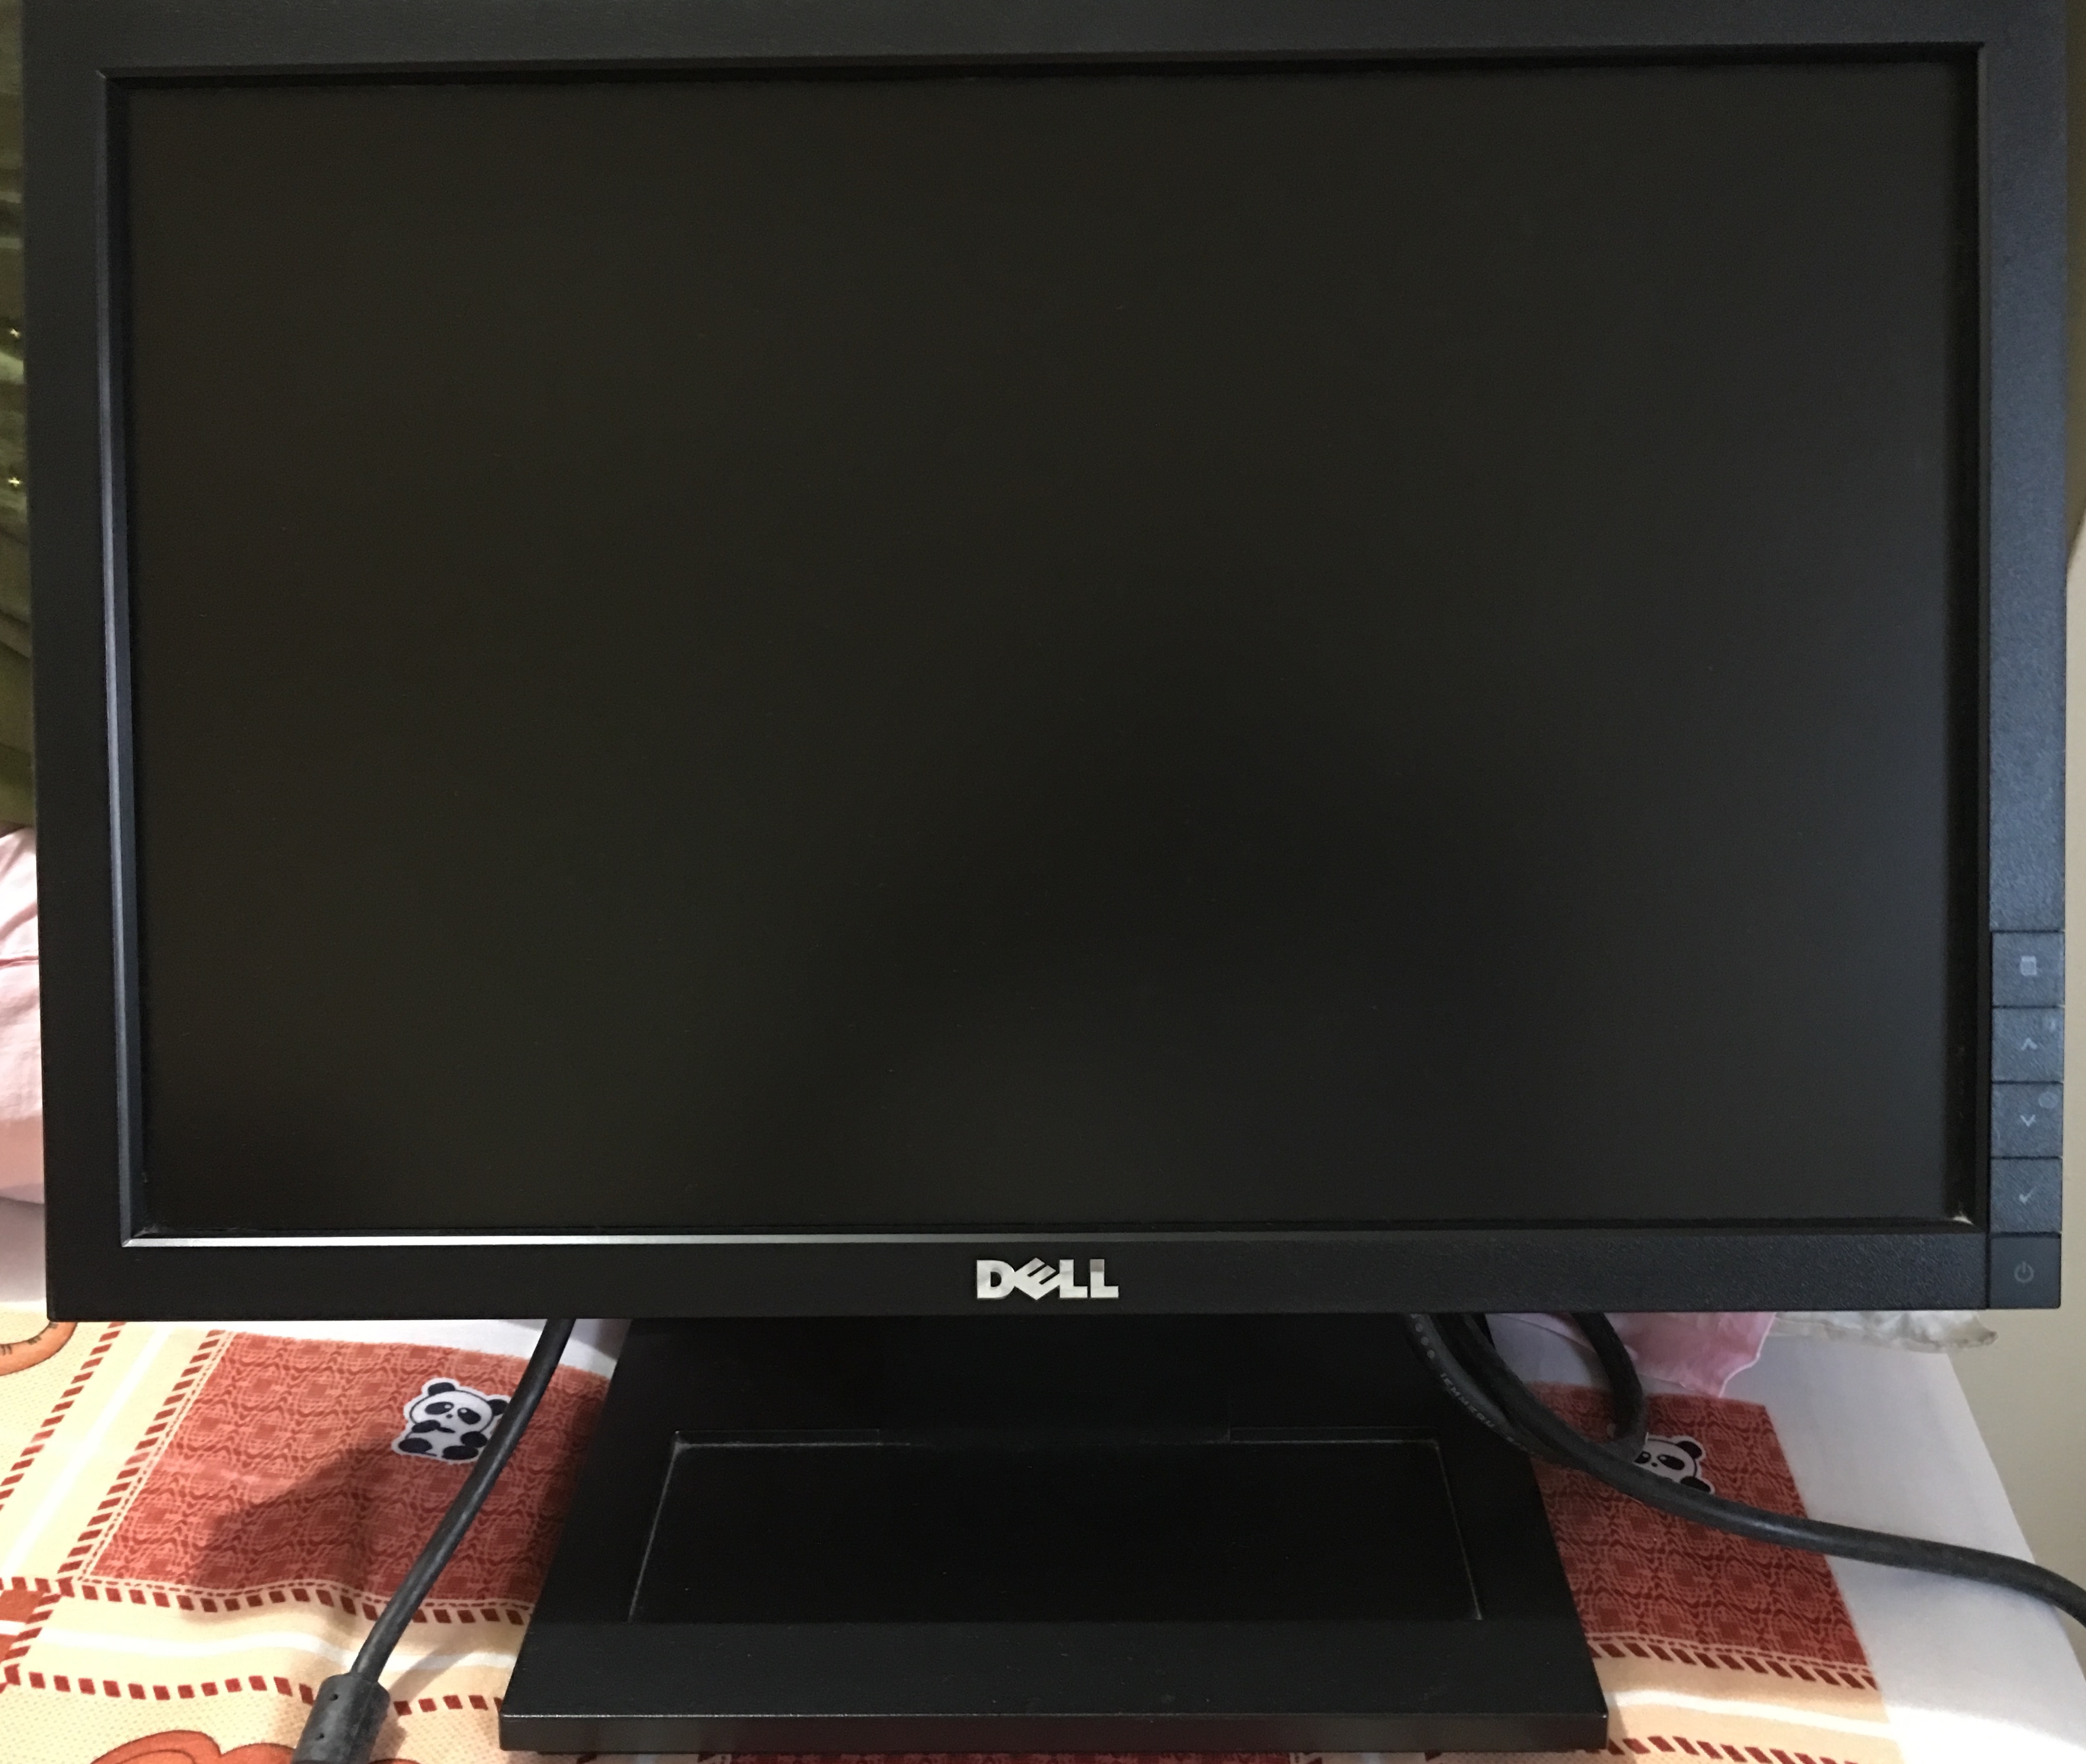 Dell 17 Inch Monitor E1709w Computers And Tech Parts And Accessories